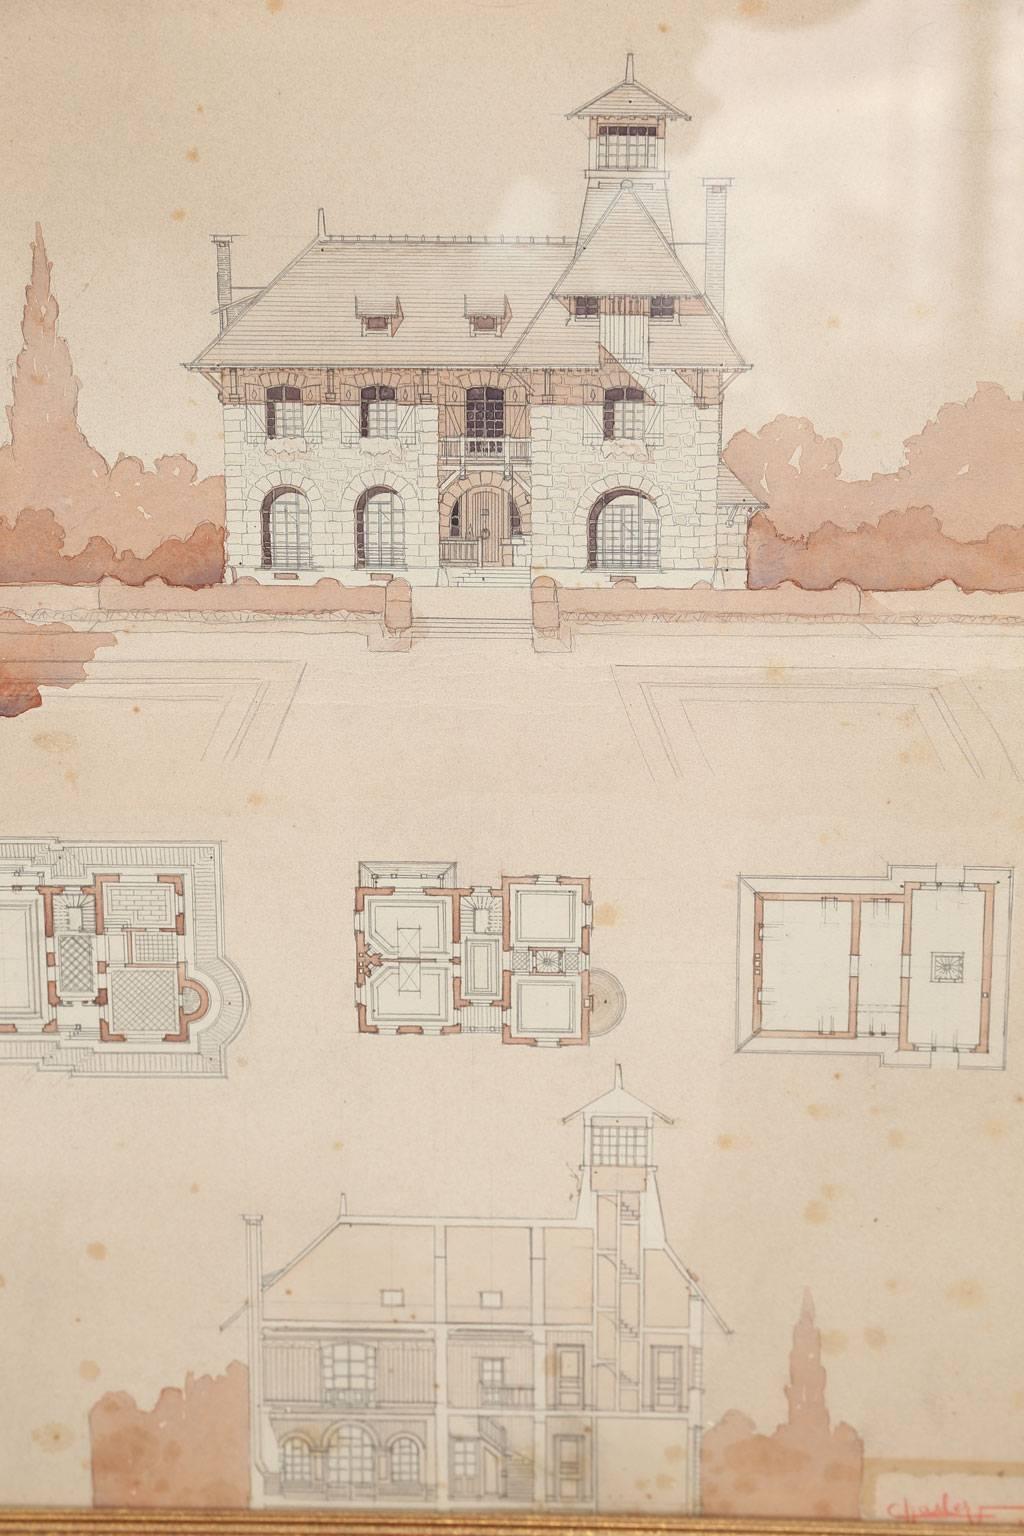 Watercolor architectural rendering in a blush color on paper within an ebonized frame. Signed by Charles Verdonnet and dated 1918. They are sold individually and priced $1,600 each.